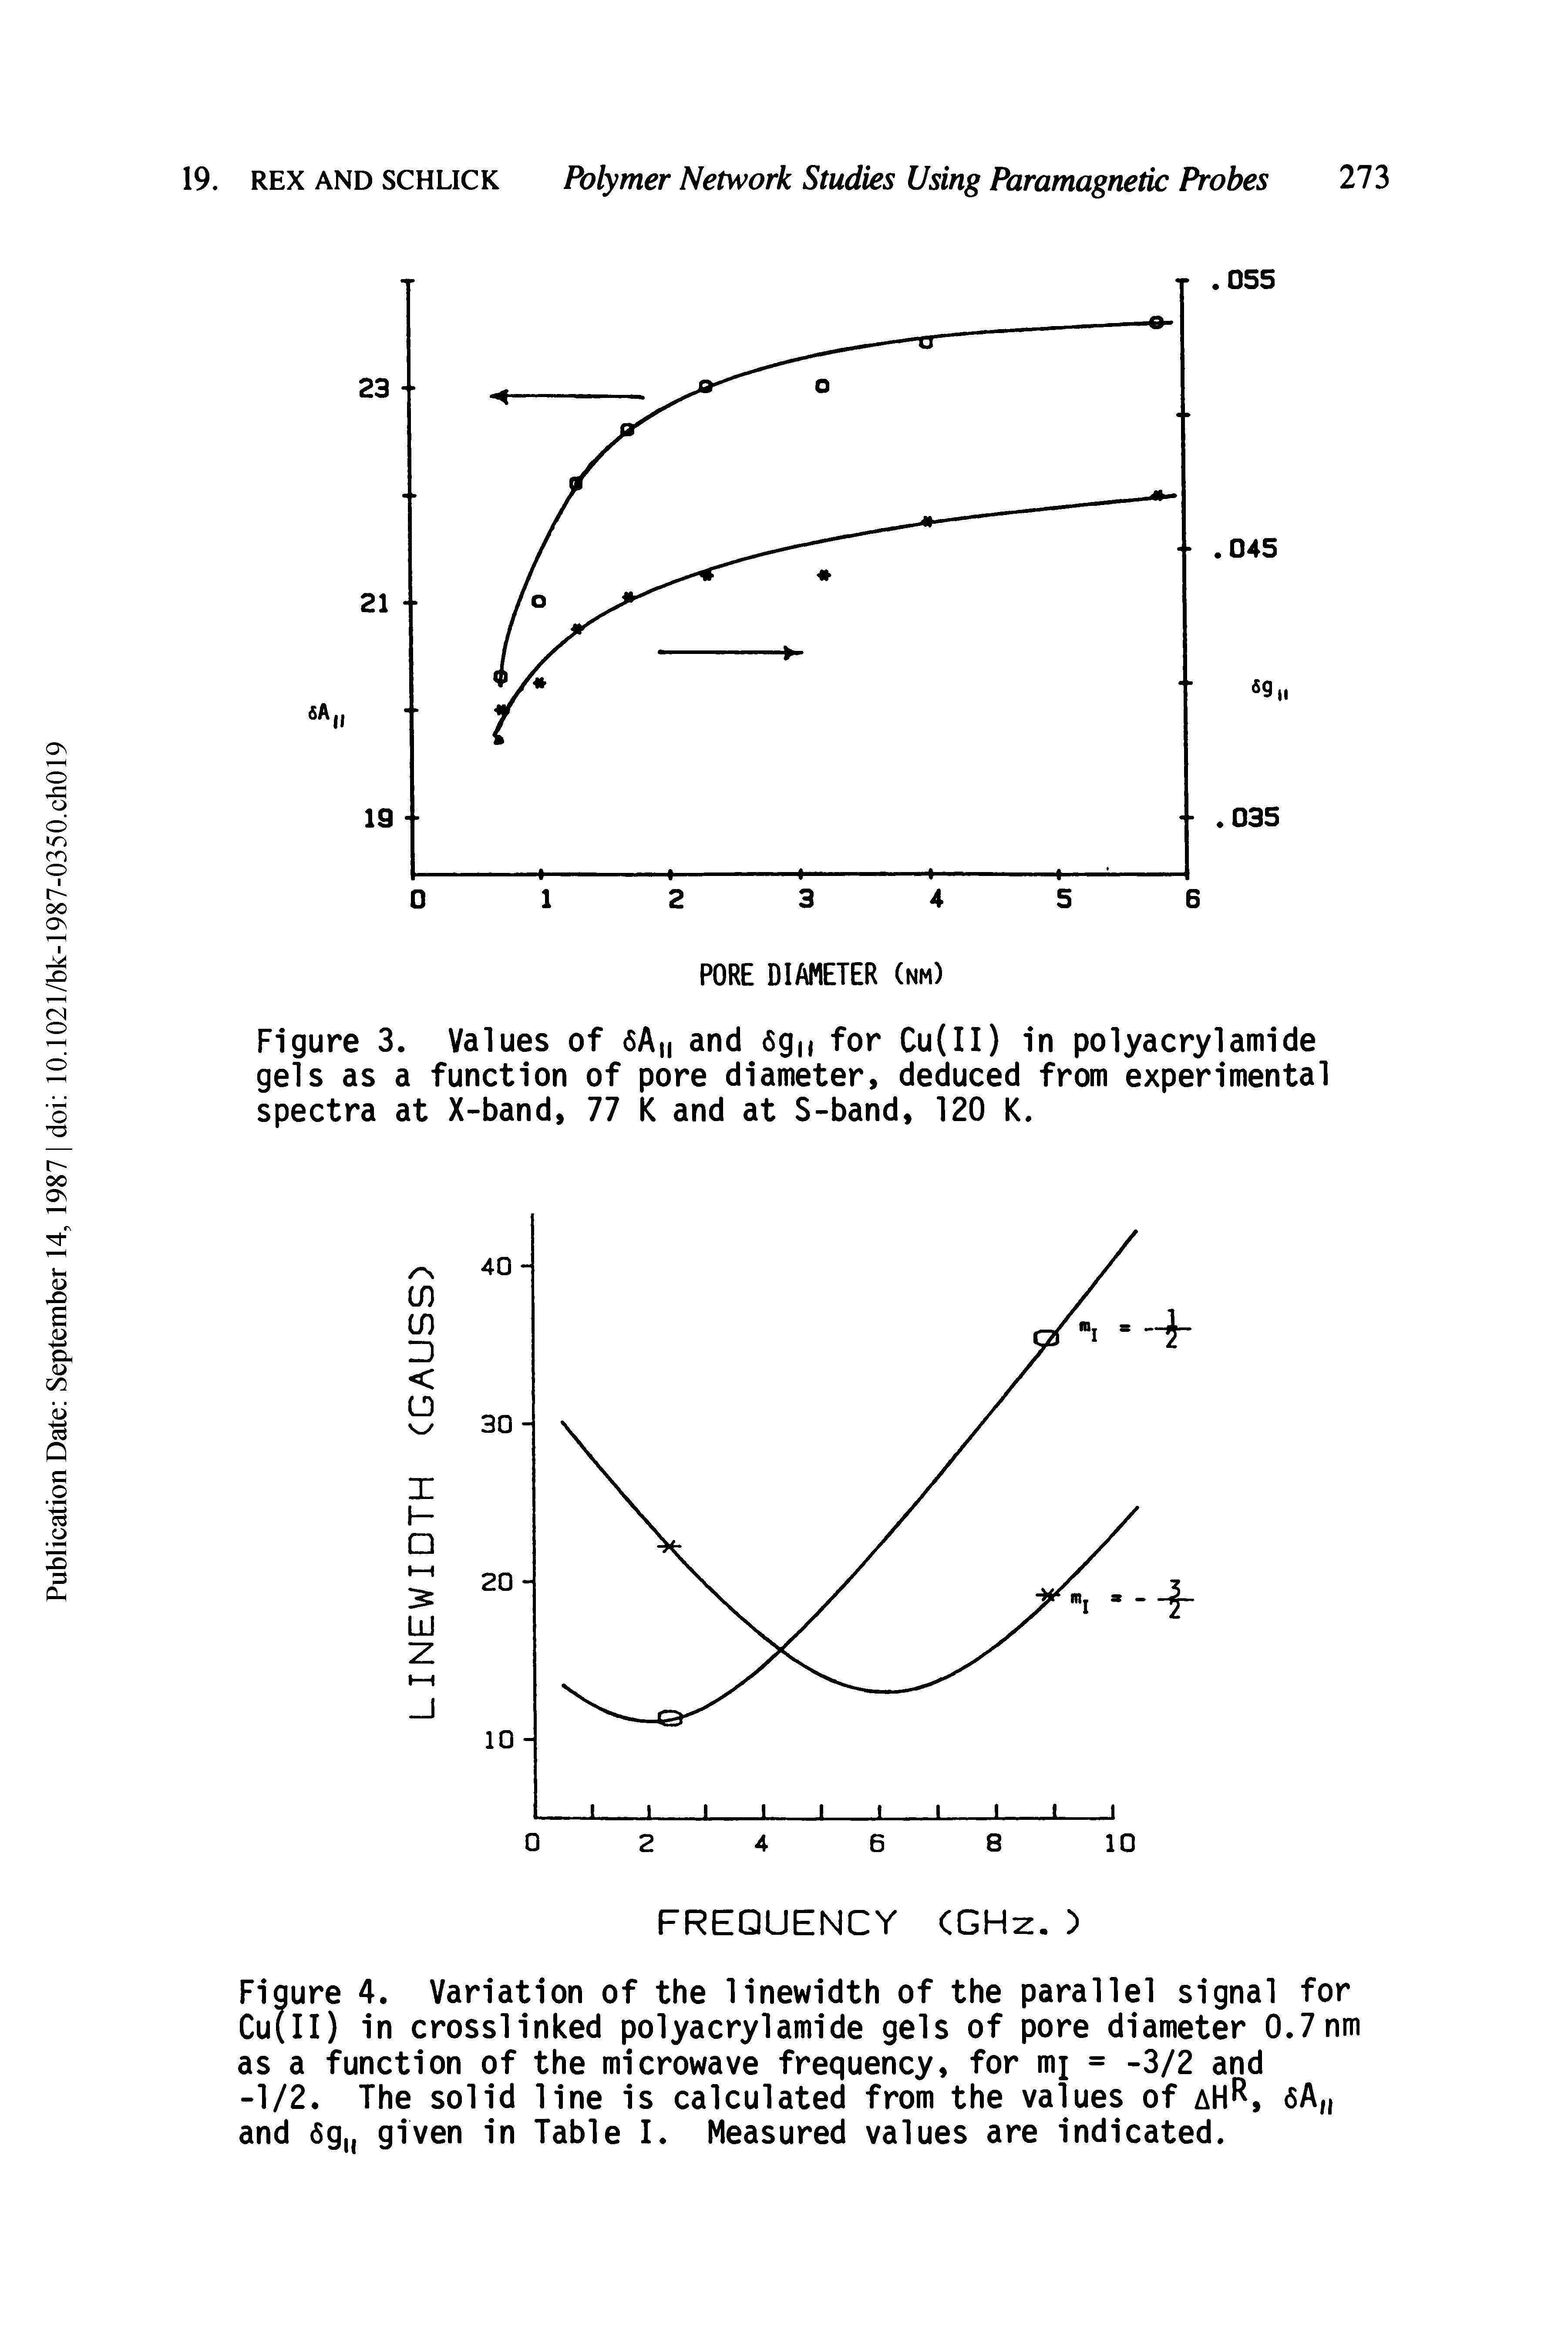 Figure 4. Variation of the linewidth of the parallel signal for Cu(ll) in crosslinked polyacrylamide gels of pore diameter 0.7 nm as a function of the microwave frequency, for mj = -3/2 and -1/2. The solid line is calculated from the values of aH, 6A and 6g given in Table I. Measured values are indicated.